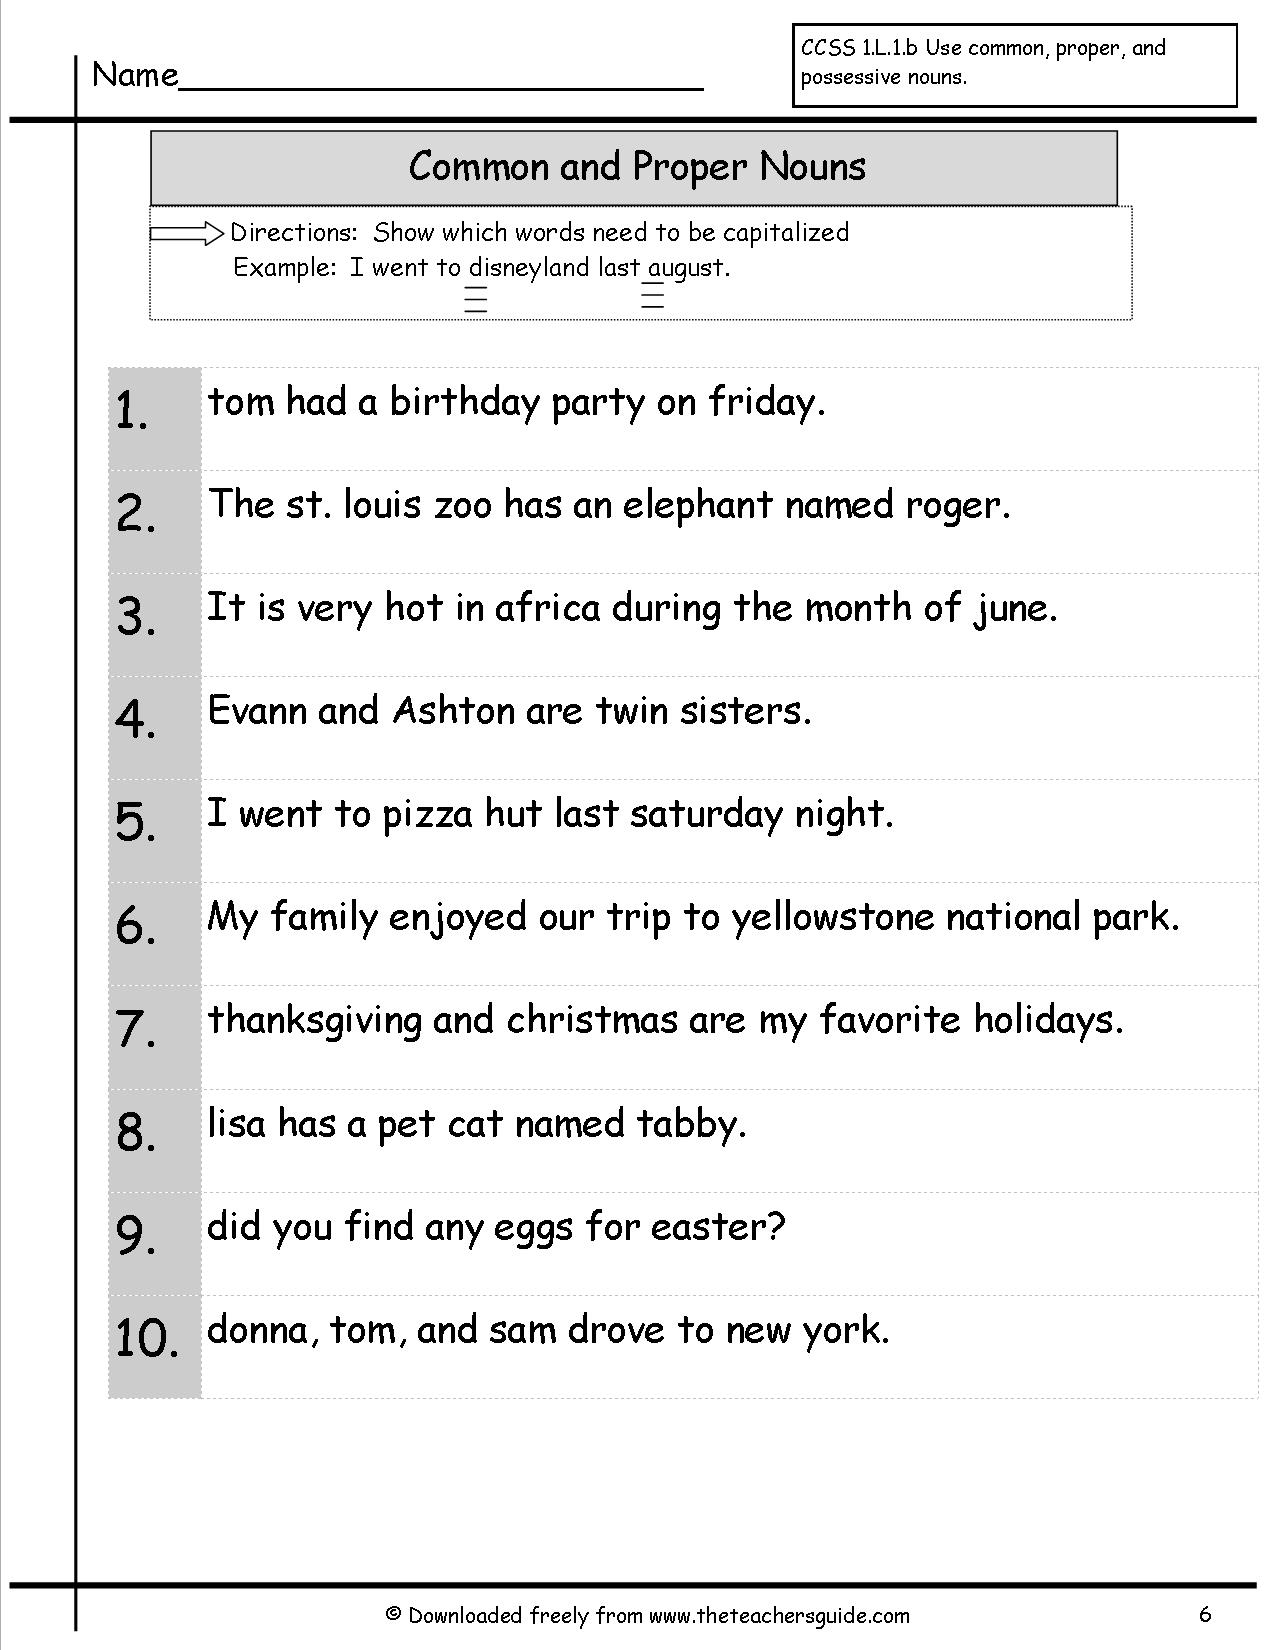 common-and-proper-noun-worksheet-for-class-3-common-and-proper-nouns